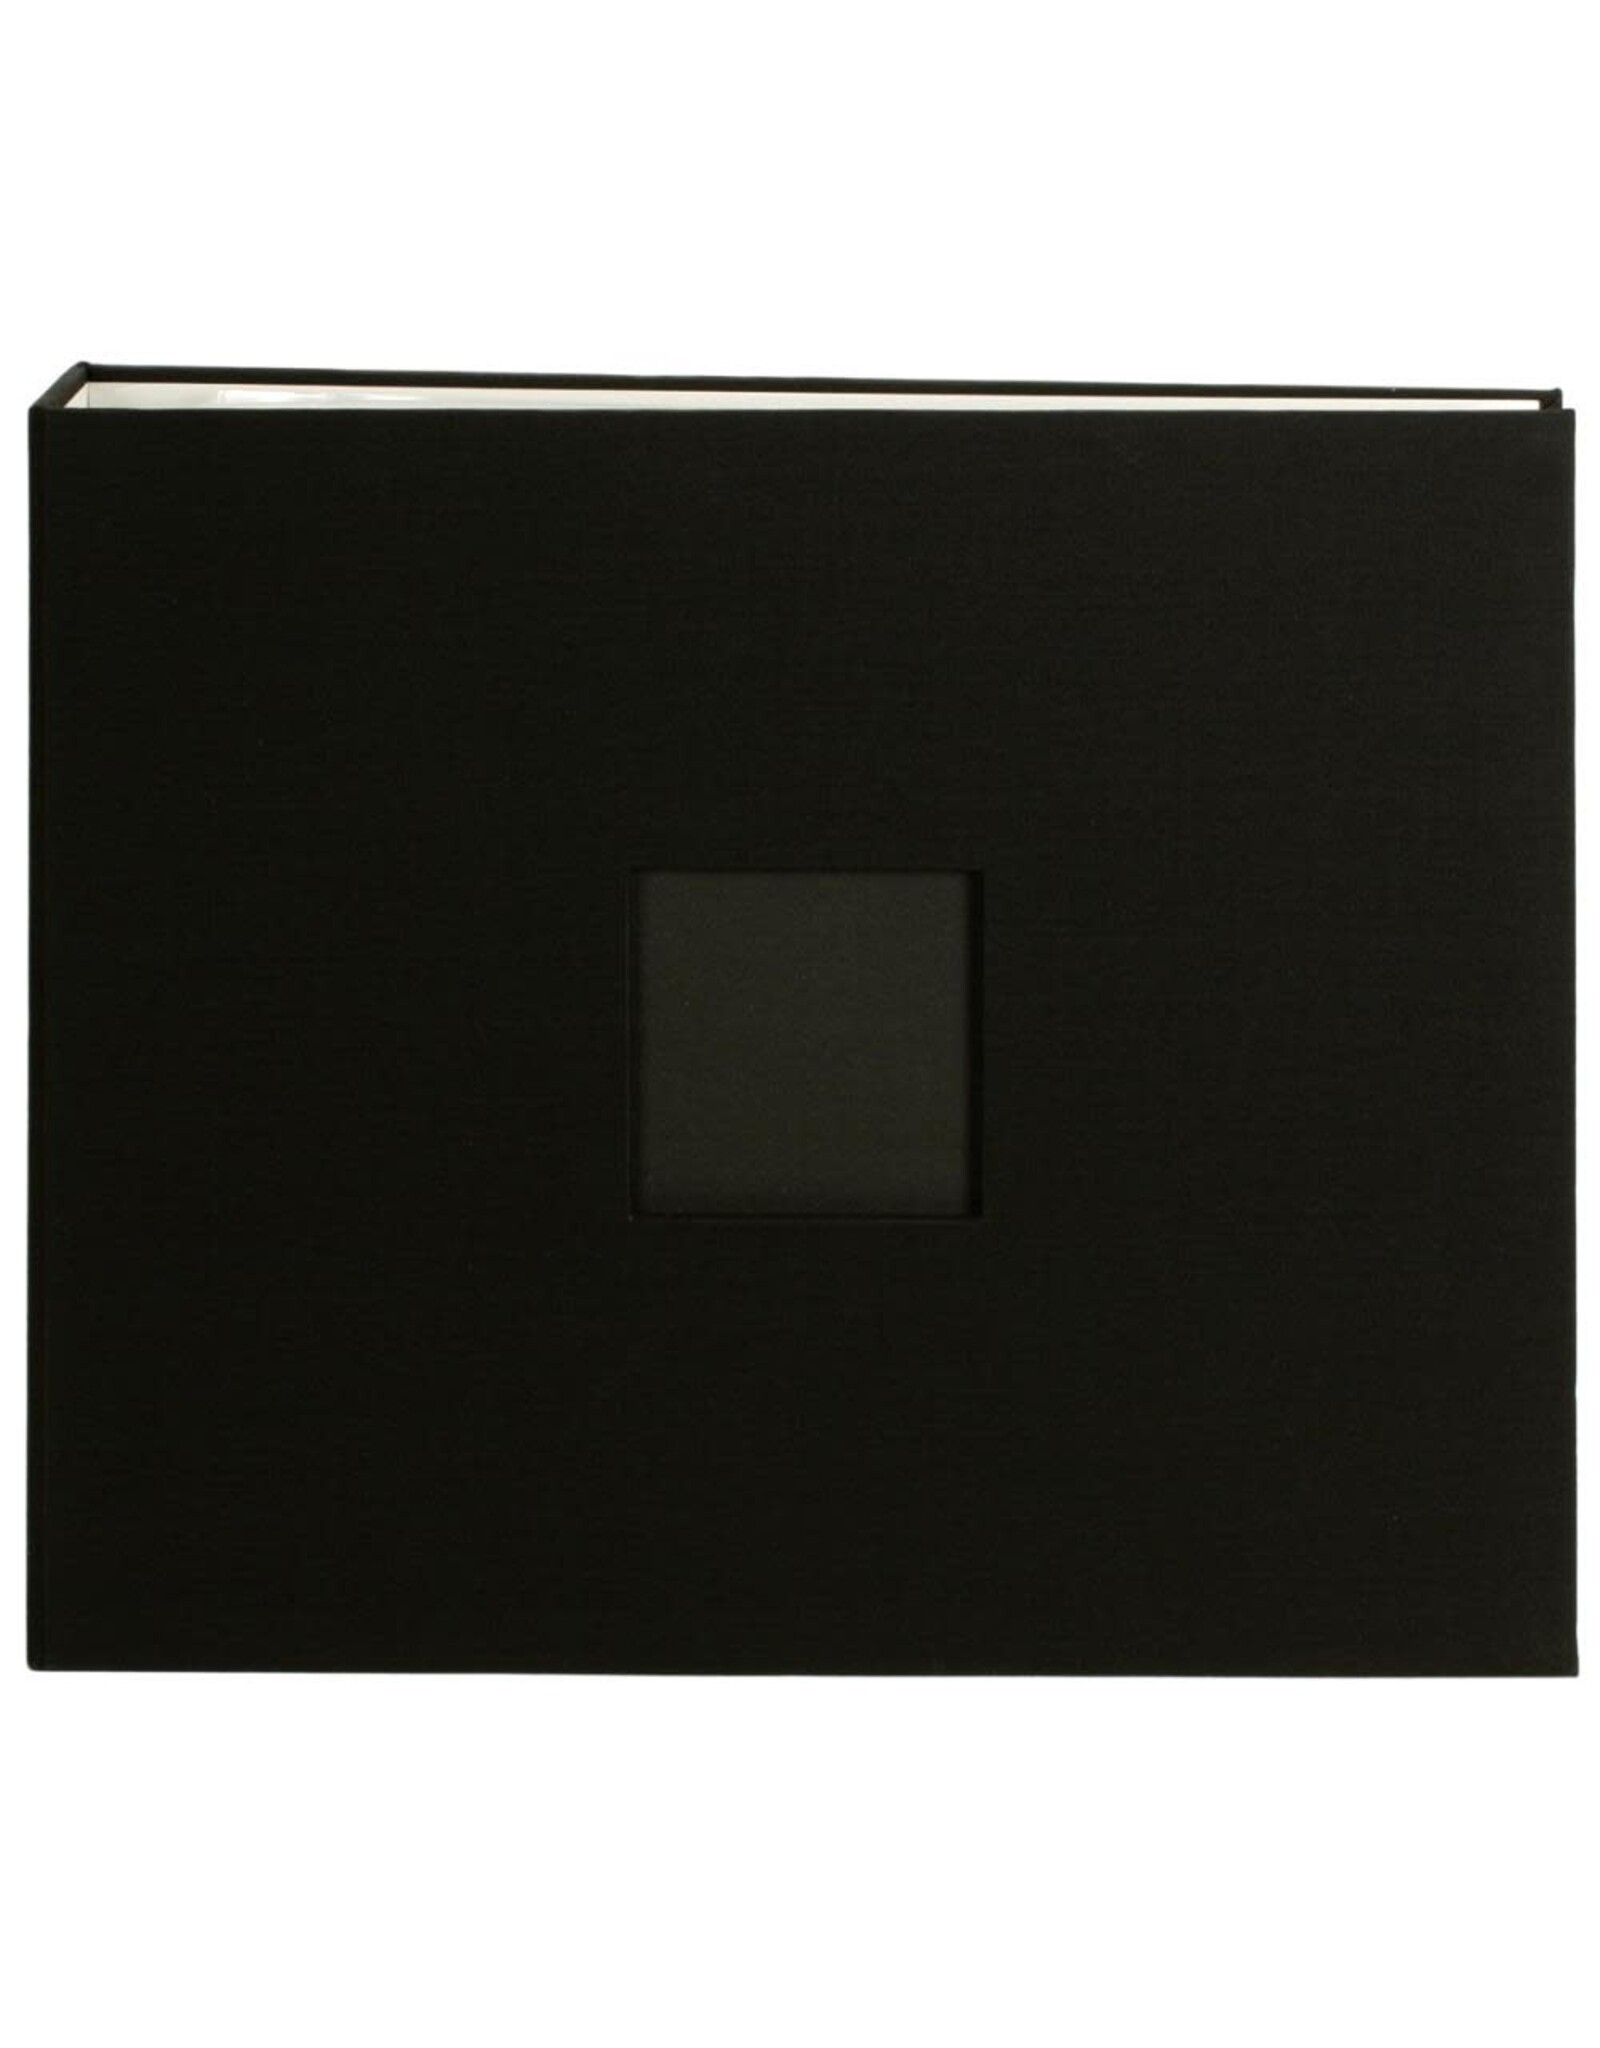 AMERICAN CRAFTS AMERICAN CRAFTS MEMOROLOGY BLACK D RING CLOTH ALBUM WITH WINDOW